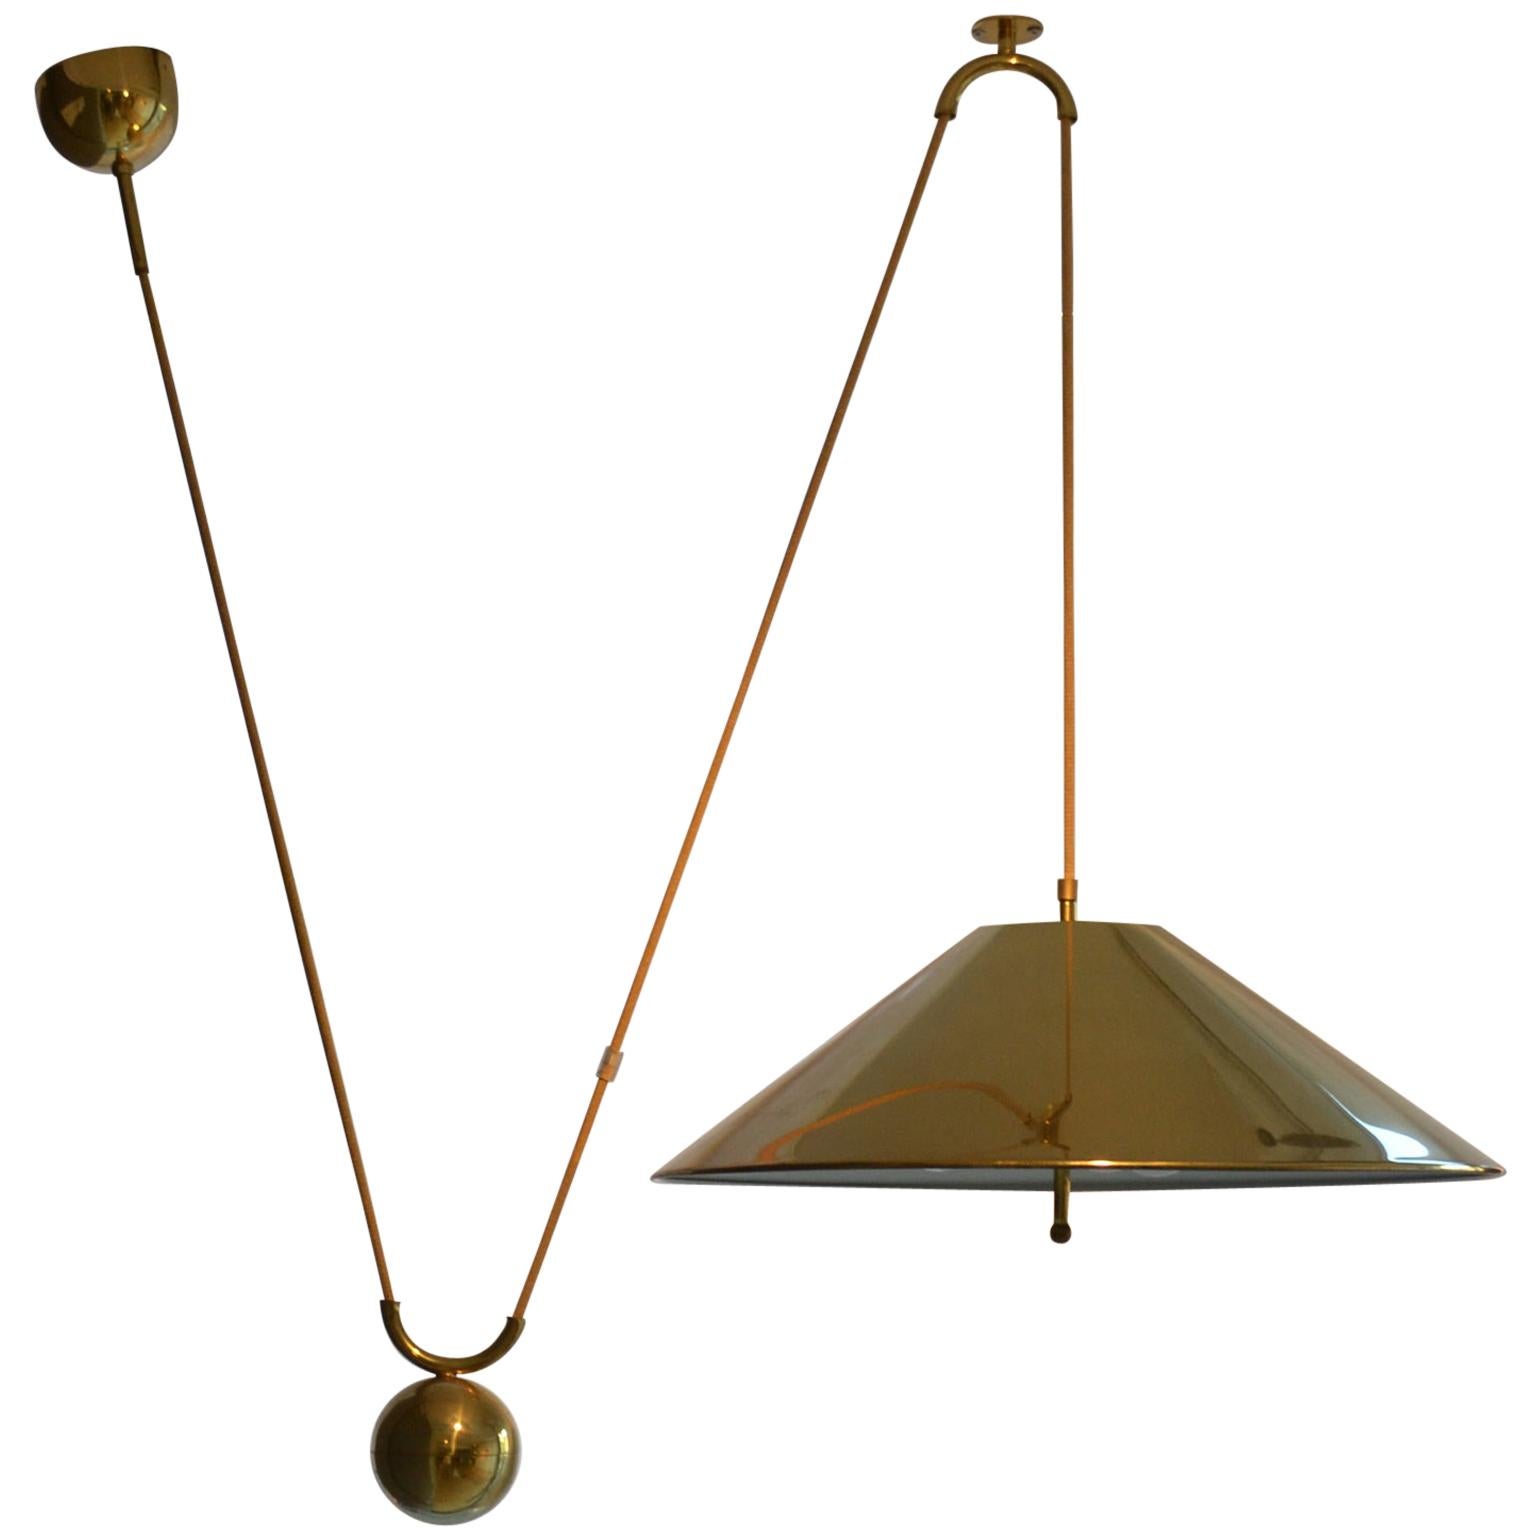 Counterbalance pendant 'Keos' by Florian Schulz with side weight. Strong and minimal pendant in a high quality brass moves smoothly up and down due to the solid brass counterweight. The shiny brass polished brass is coated. The shade holds three